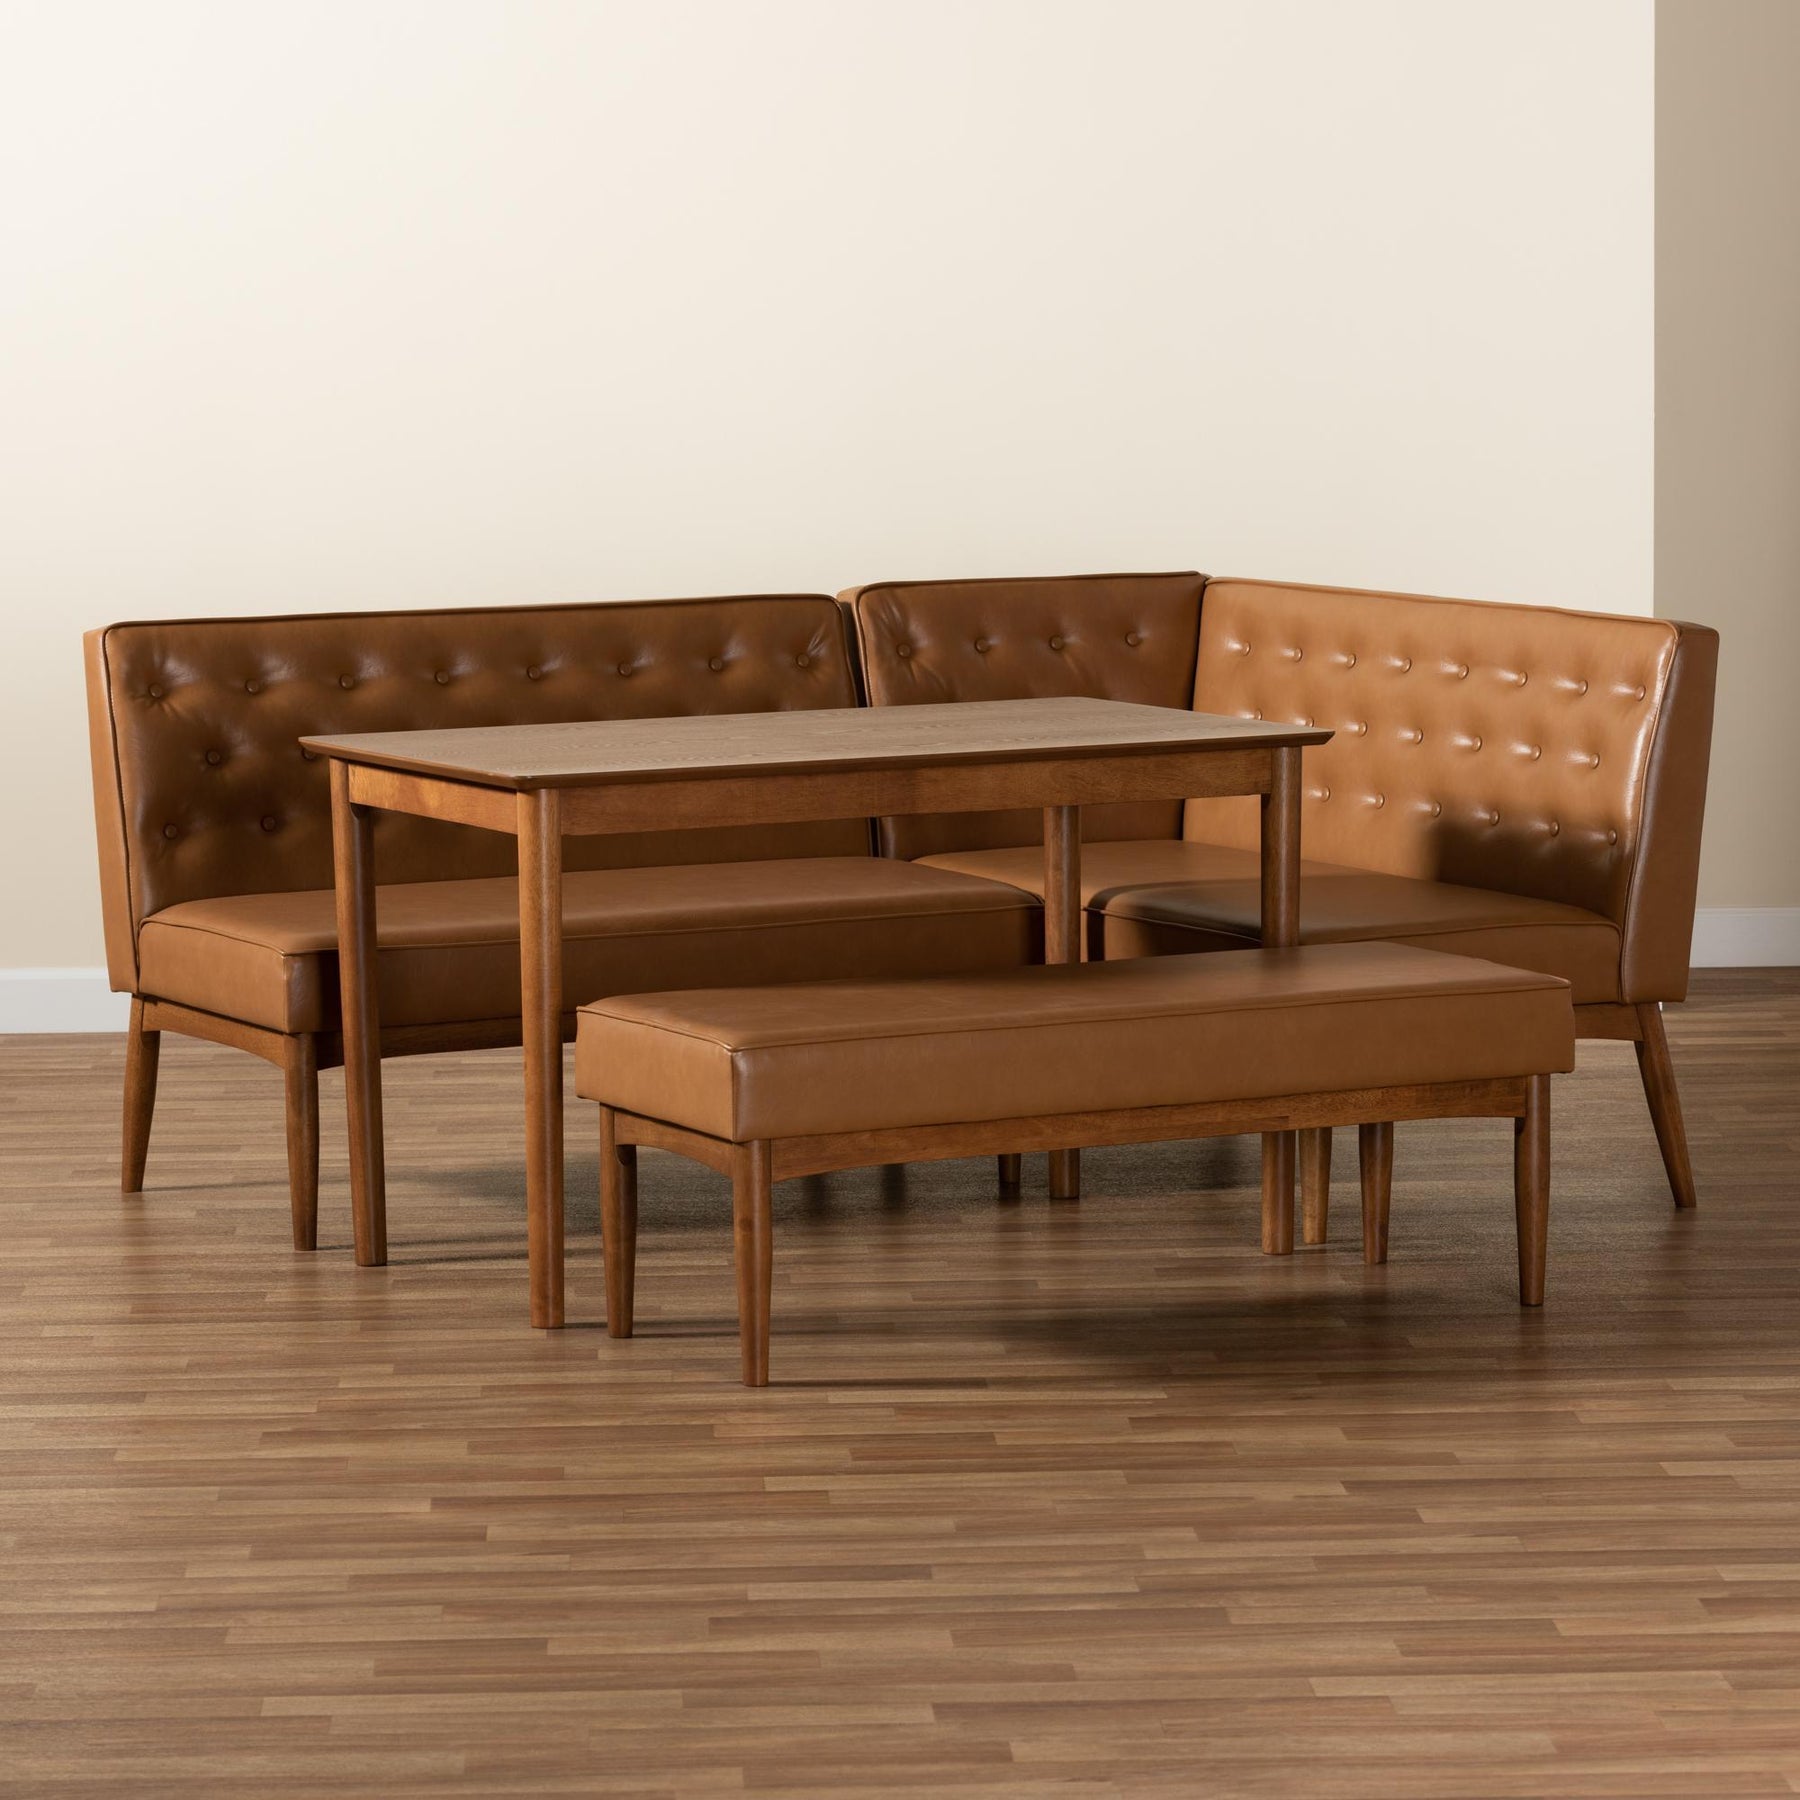 Baxton Studio Riordan Mid-Century Modern Tan Faux Leather Upholstered And Walnut Brown Finished Wood 4-Piece Dining Nook Set - BBT8051.13-Tan/Walnut-4PC Dining Nook Set